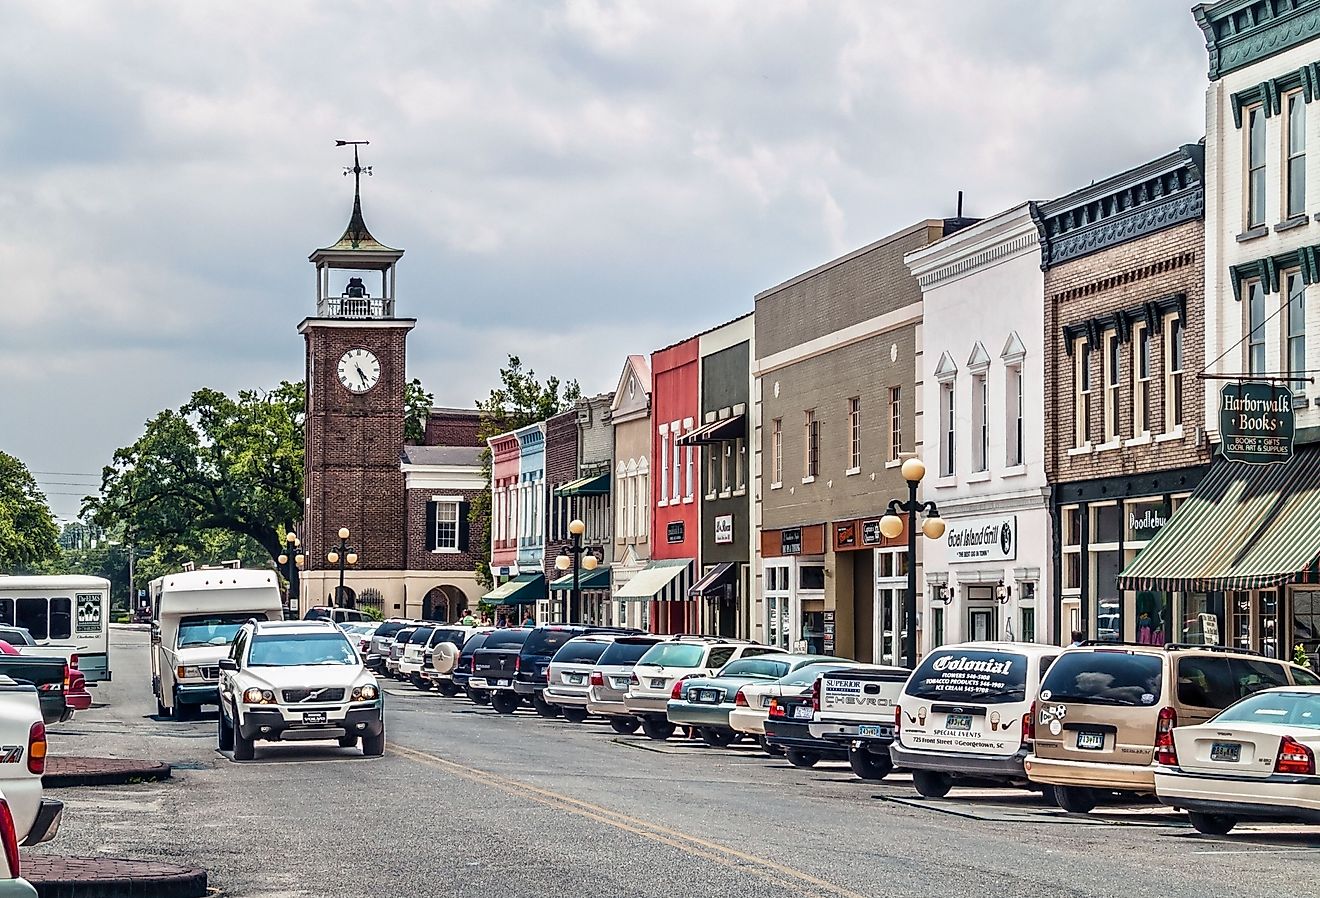 Looking down Front Street with shops and the old clock tower in Georgetown, South Carolina. Image credit Andrew F. Kazmierski via Shutterstock